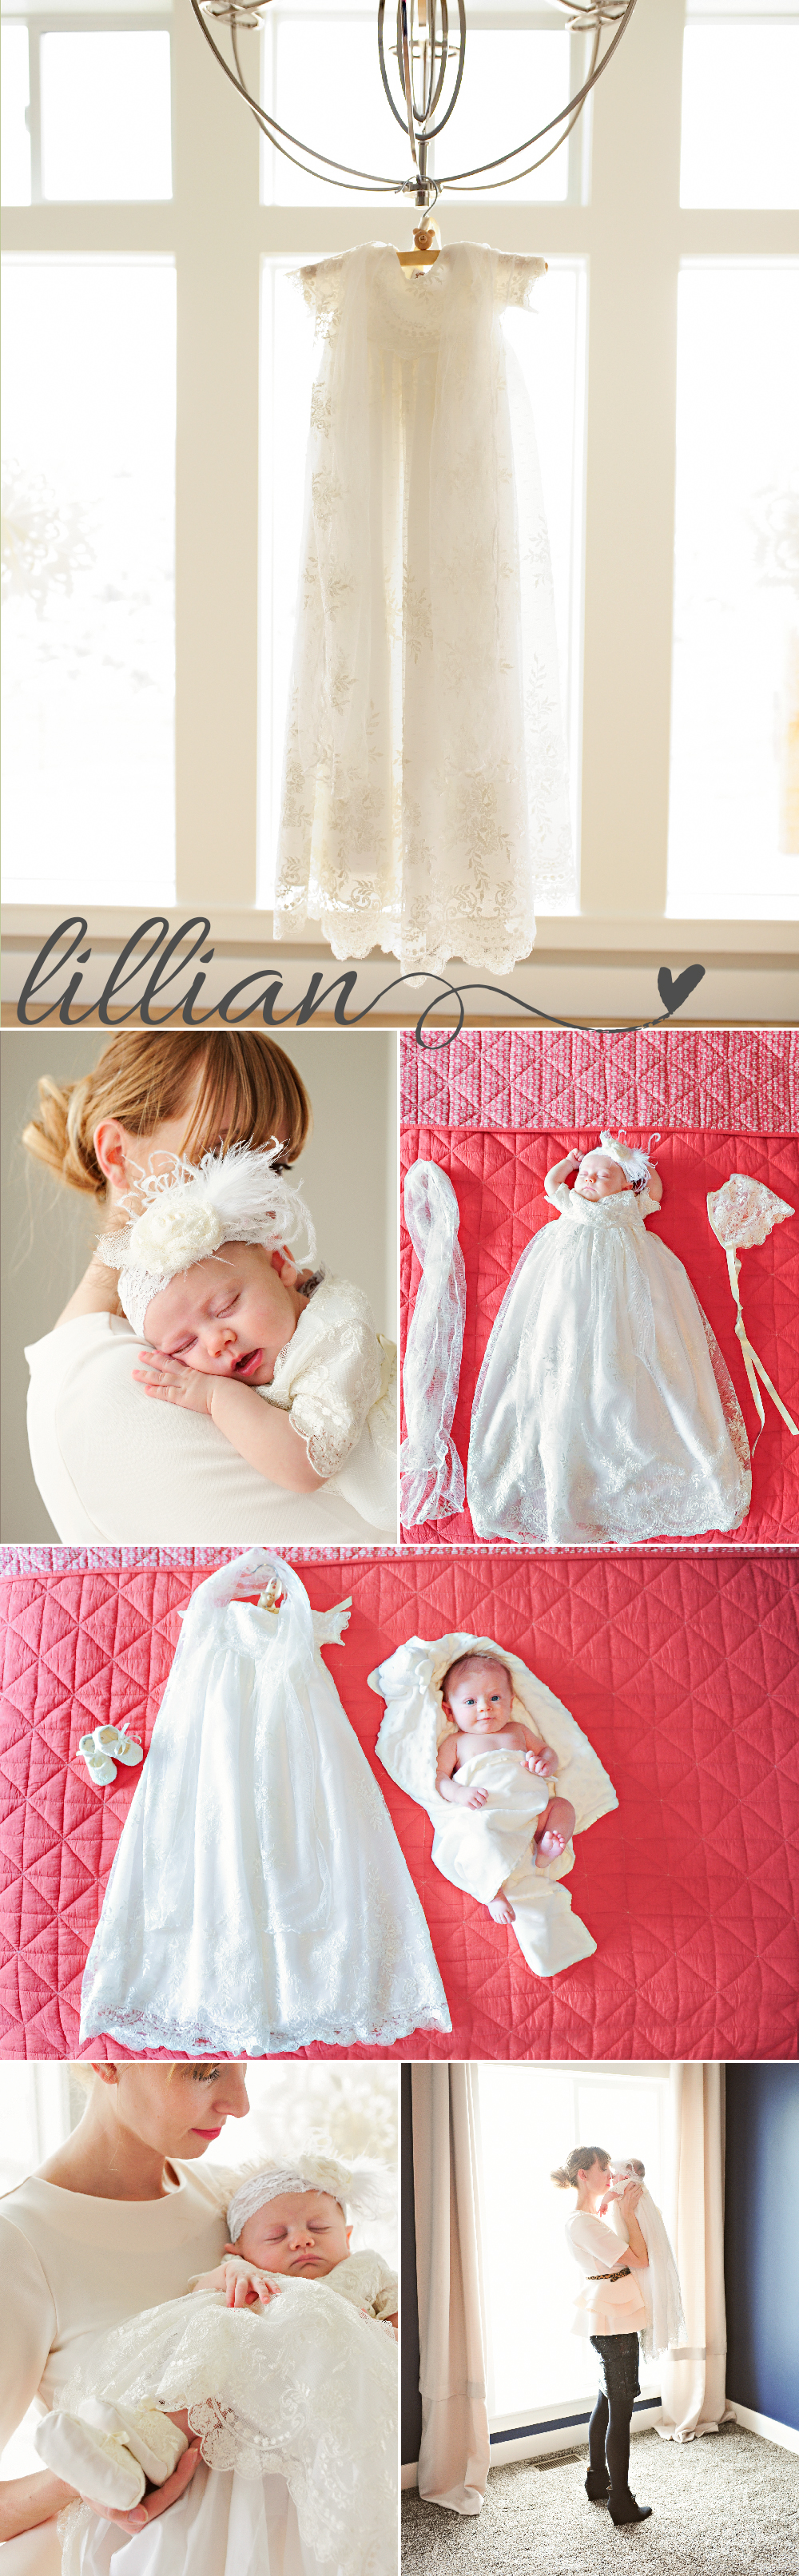 Lillian Winter Christening Gowns - One Small Child